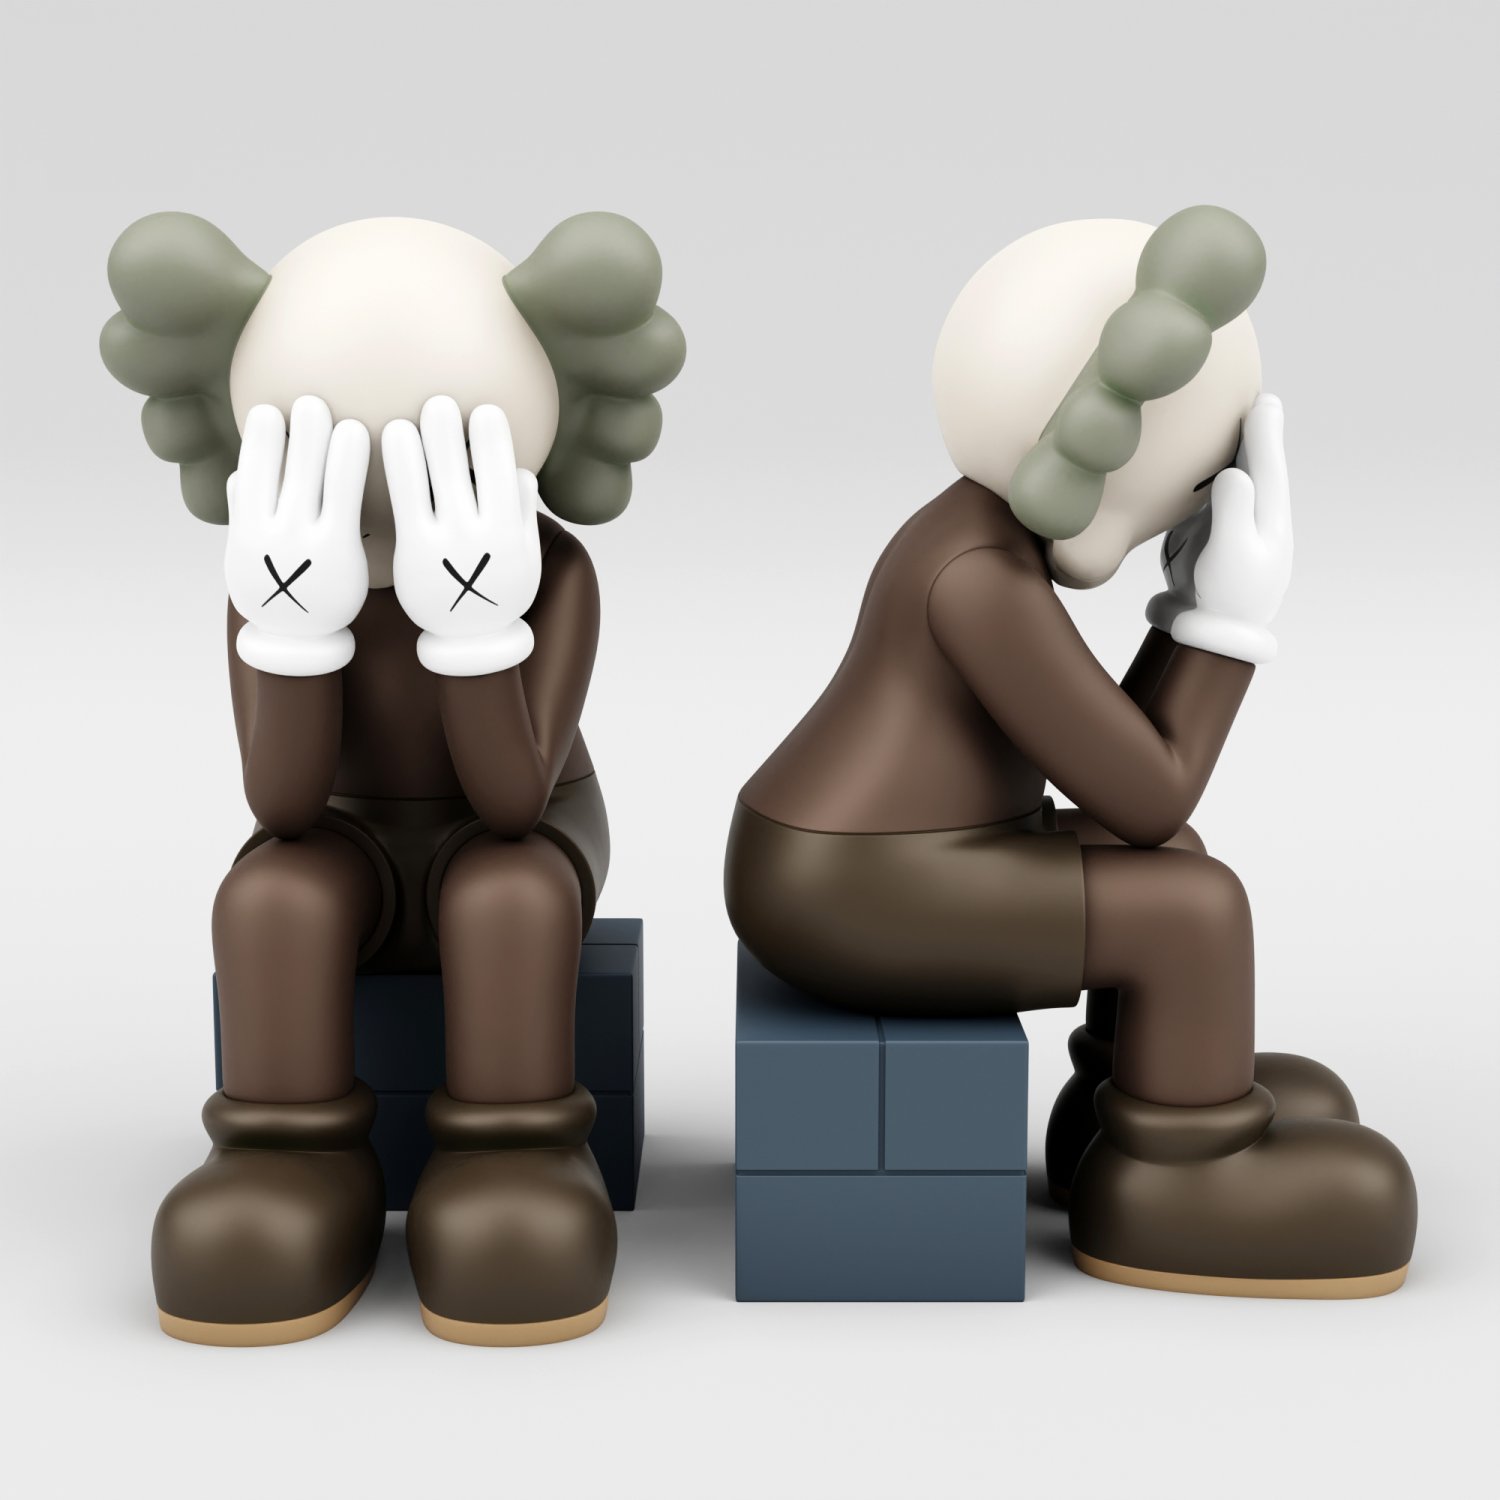 Download Brighten up your walls with this colorful Cool Kaws